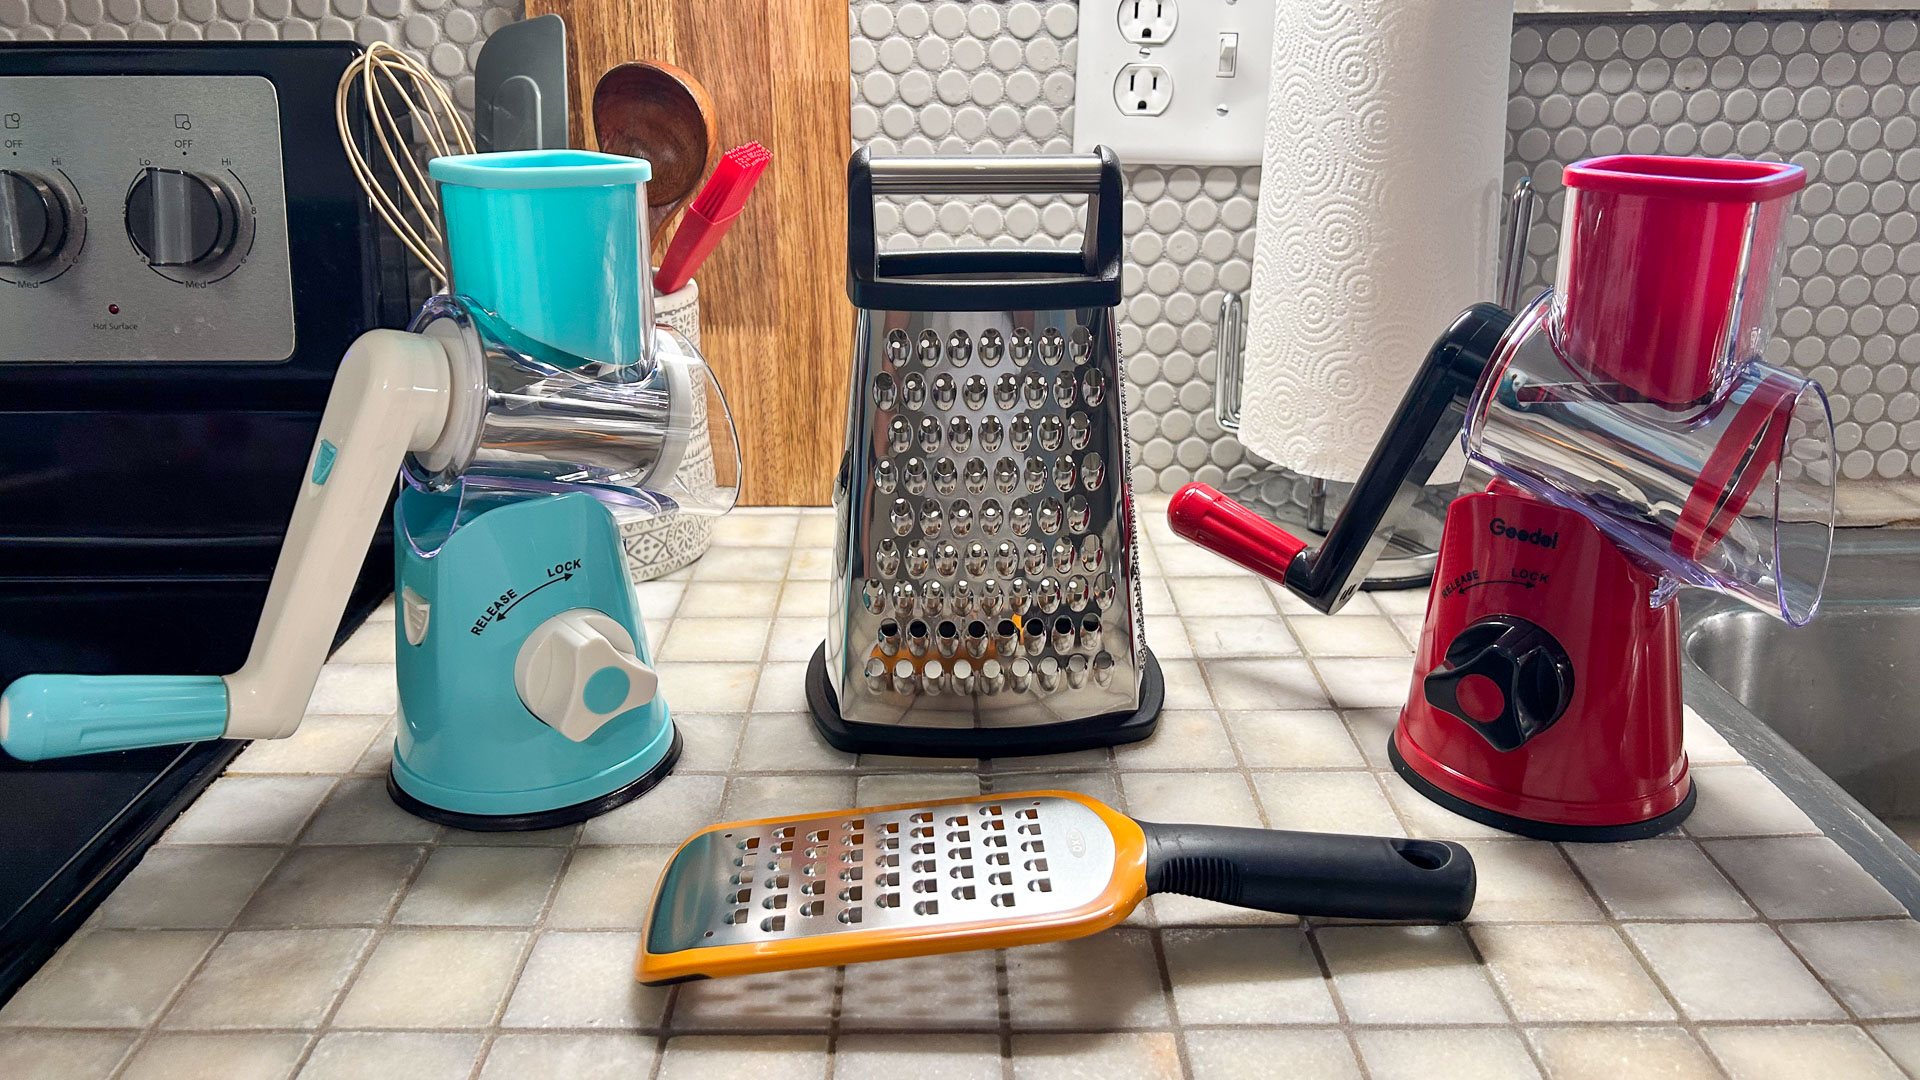 https://www.dontwasteyourmoney.com/wp-content/uploads/2023/05/cheese-grater-all-review-ub-1.jpg